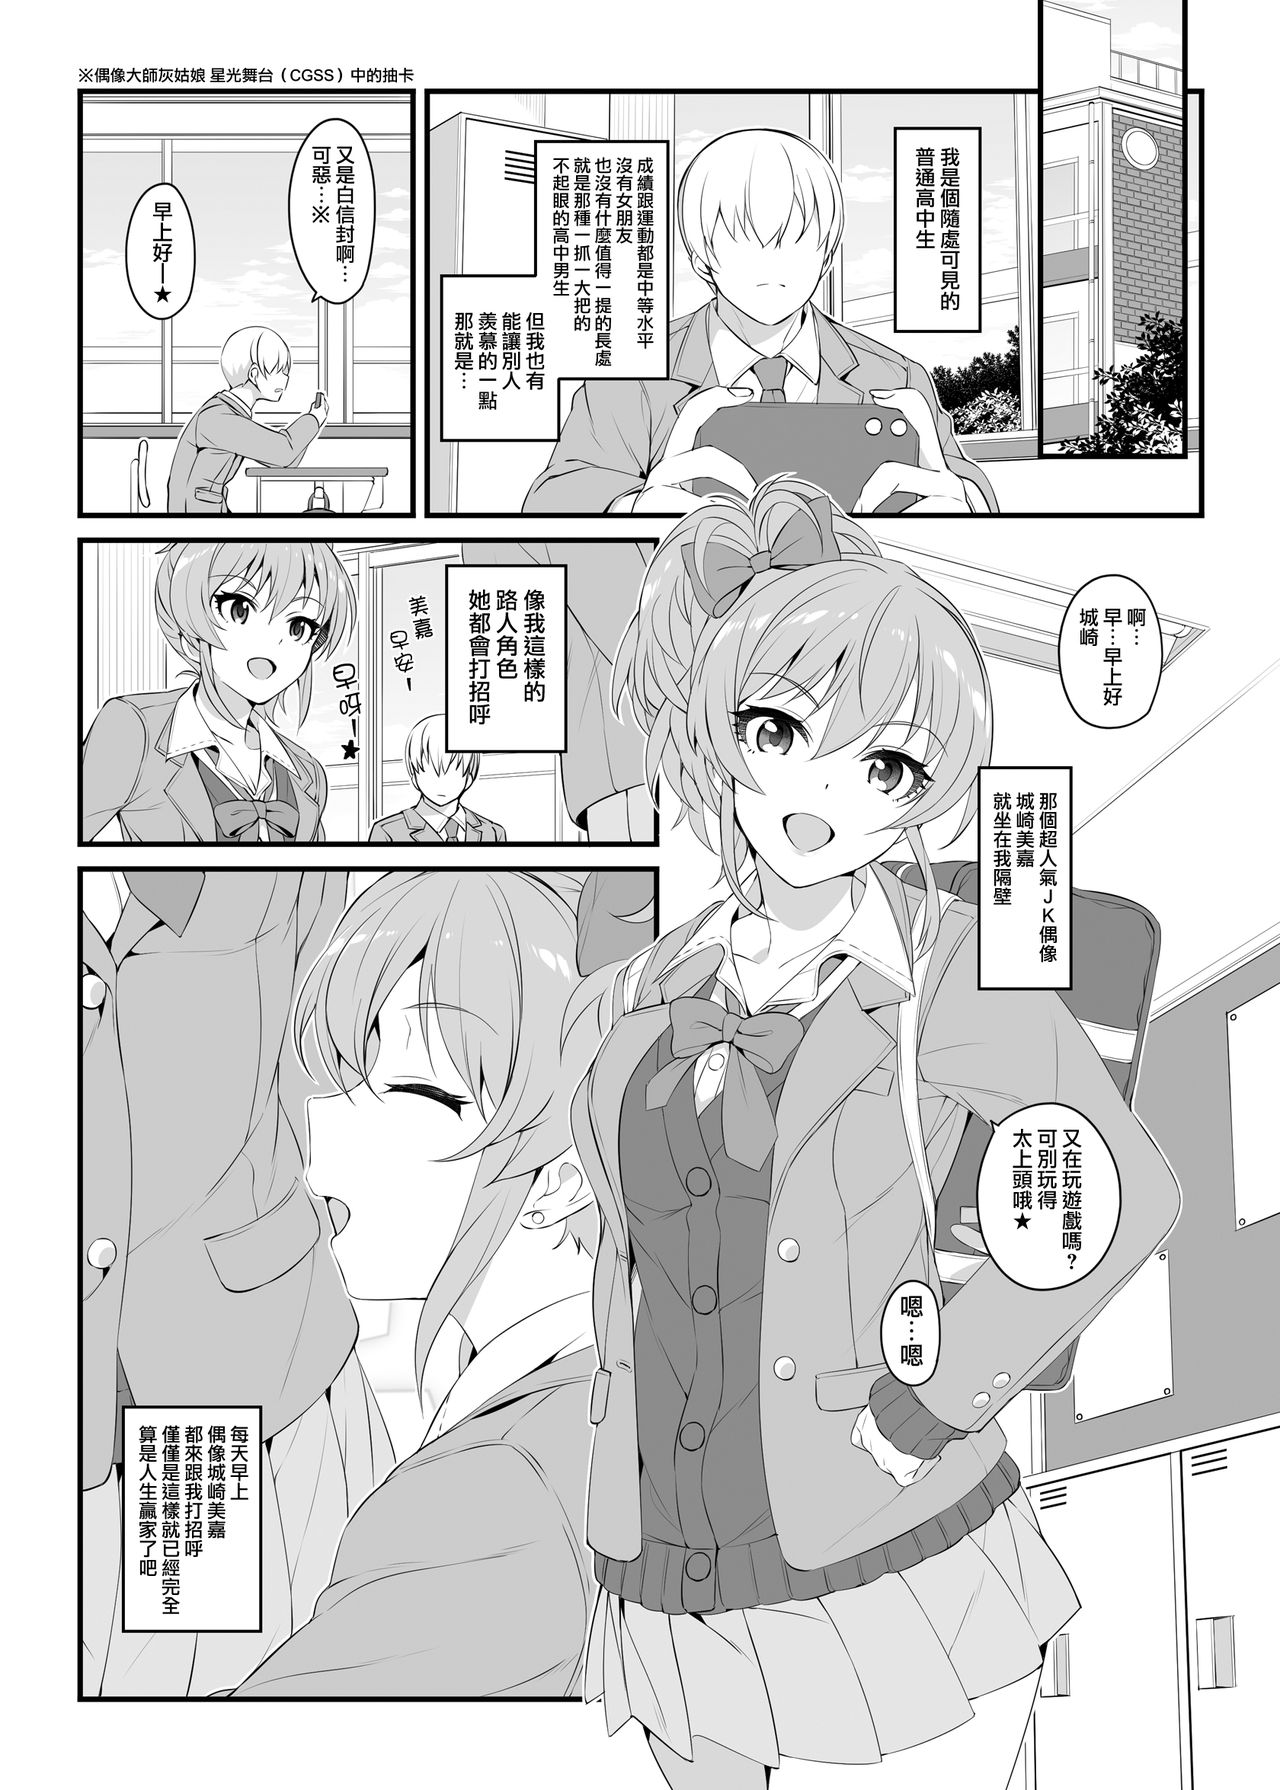 [Jekyll and Hyde (MAKOTO)] The first secret meeting of the Charismatic Queens. (THE IDOLM@STER CINDERELLA GIRLS) [Chinese] [無邪気漢化組] [Digital] page 5 full